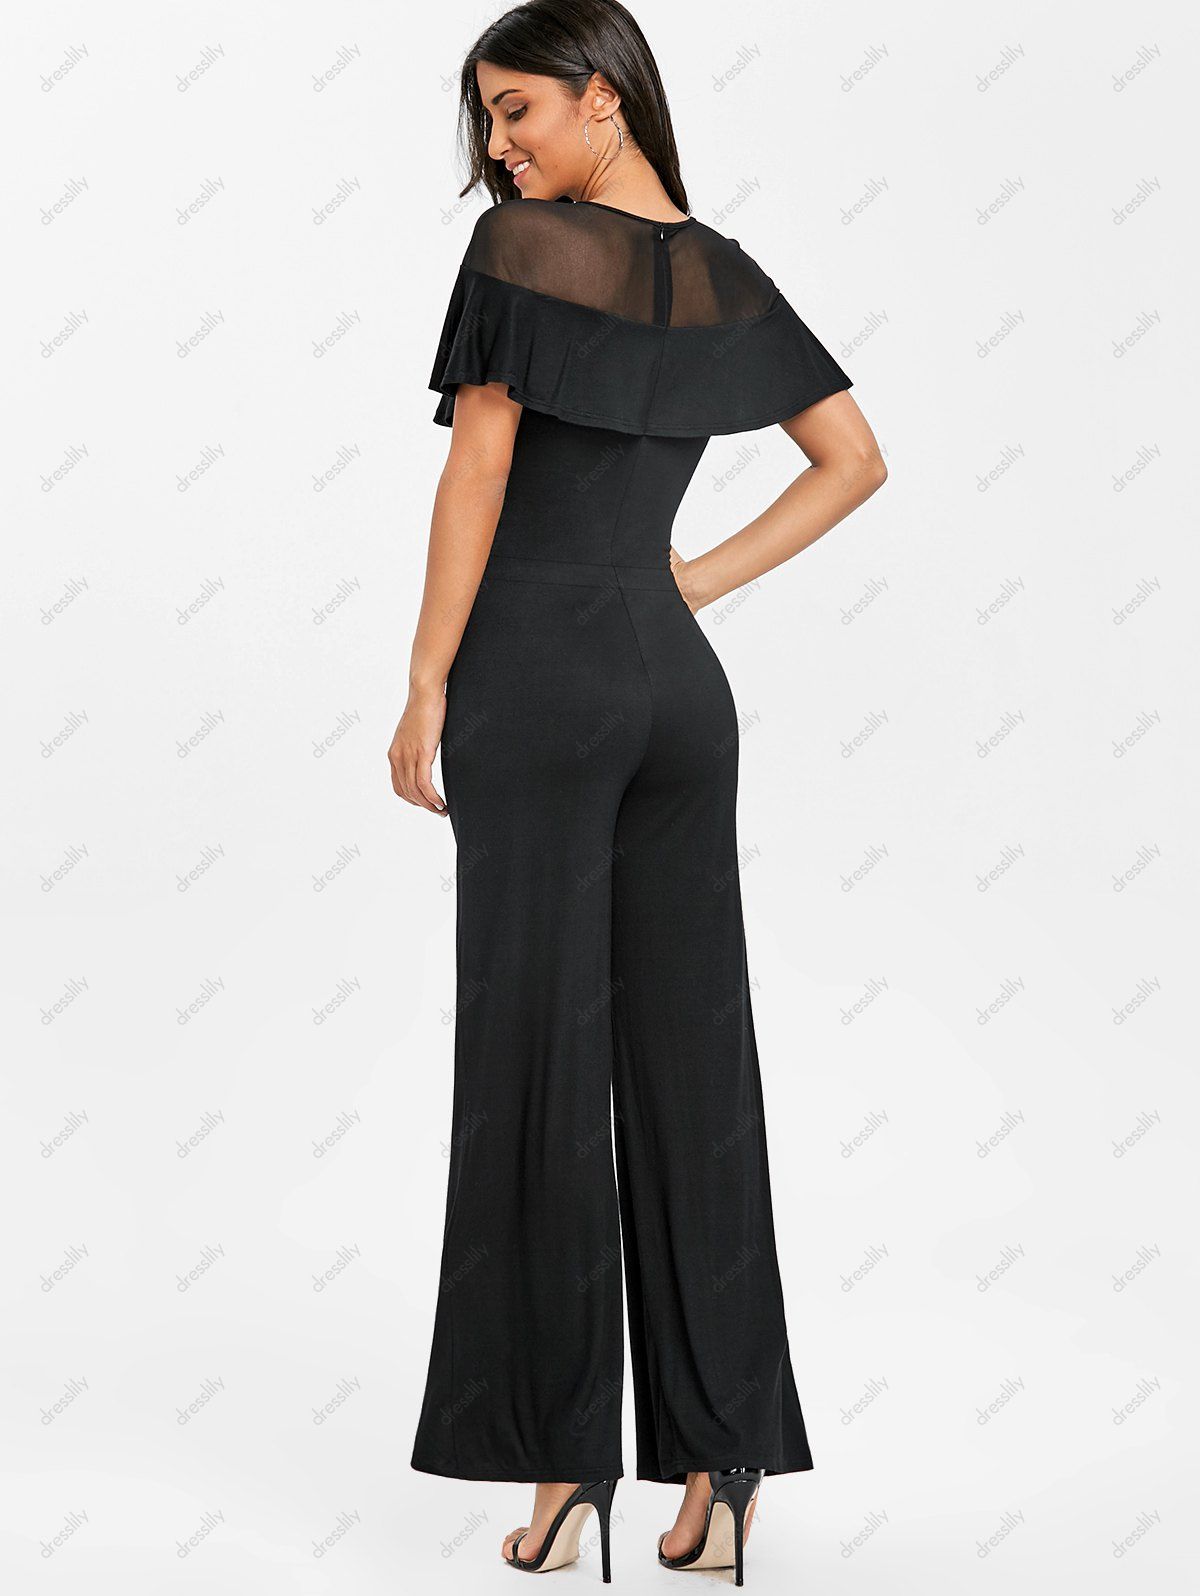 [24% OFF] 2021 Embroidery Mesh Insert Palazzo Jumpsuit In BLACK | DressLily